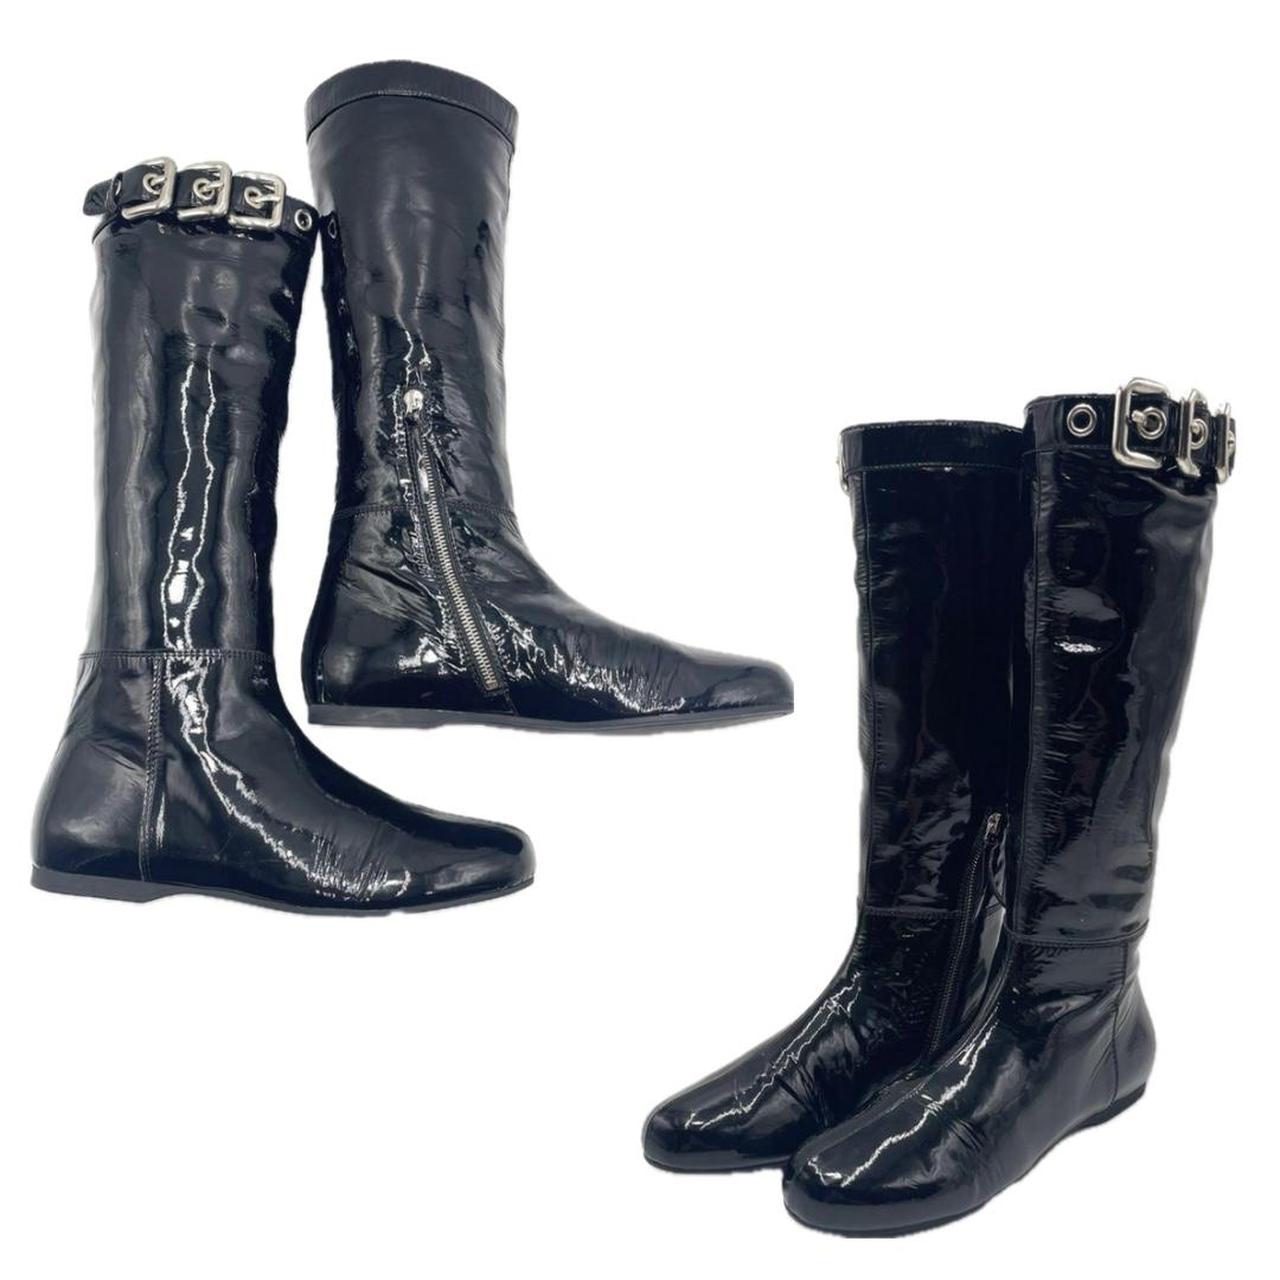 Vintage Miu Miu Patent Leather Boots with Metal